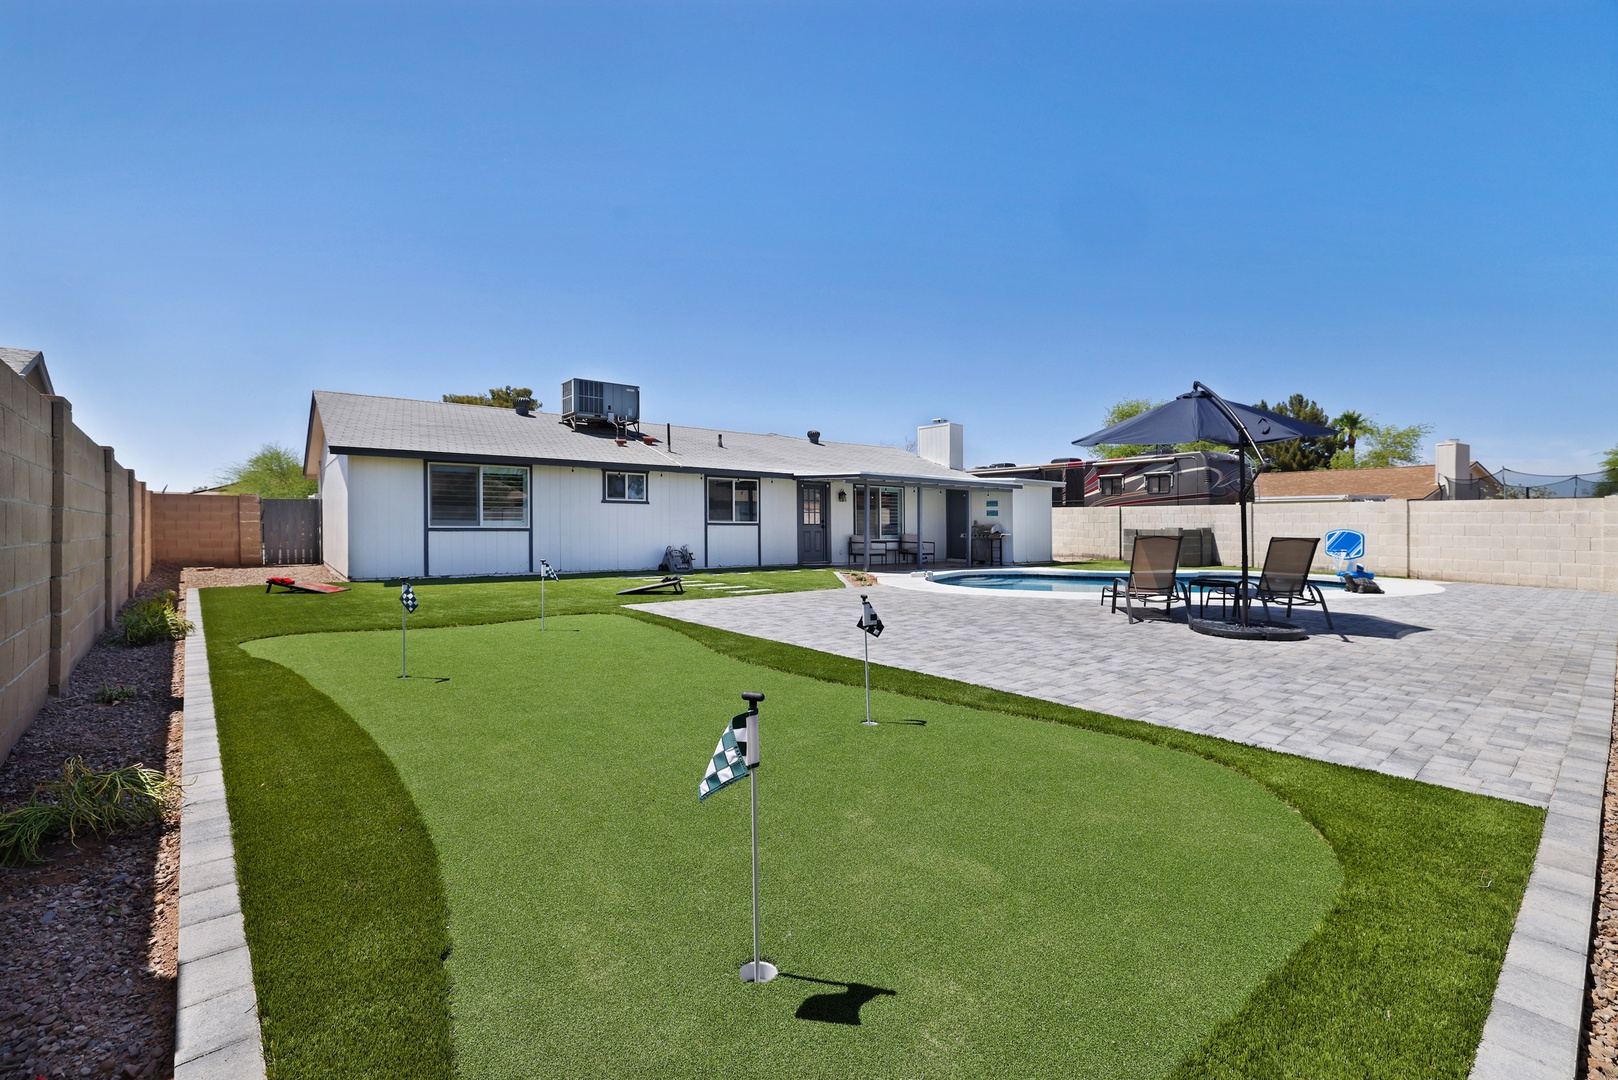 Practice your golf game on the putting green